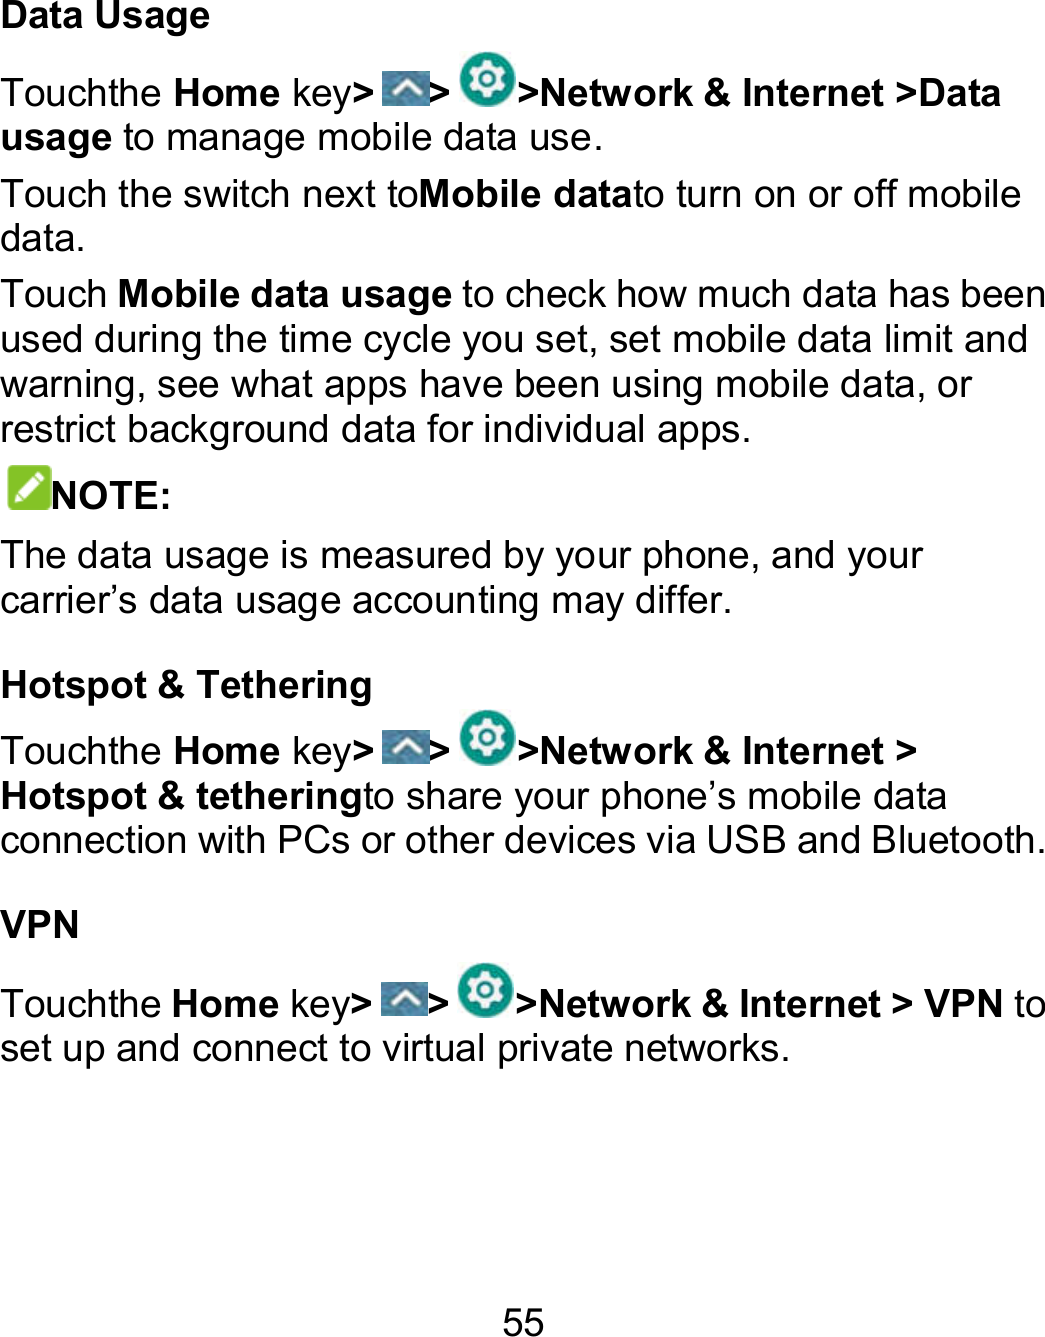 55 Data Usage Touchthe Home key&gt; &gt; &gt;Network &amp; Internet &gt;Data usage to manage mobile data use.   Touch the switch next toMobile datato turn on or off mobile data. Touch Mobile data usage to check how much data has been used during the time cycle you set, set mobile data limit and warning, see what apps have been using mobile data, or restrict background data for individual apps. NOTE: The data usage is measured by your phone, and your carrier’s data usage accounting may differ.   Hotspot &amp; Tethering Touchthe Home key&gt; &gt; &gt;Network &amp; Internet &gt; Hotspot &amp; tetheringto share your phone’s mobile data connection with PCs or other devices via USB and Bluetooth. VPN Touchthe Home key&gt; &gt; &gt;Network &amp; Internet &gt; VPN to set up and connect to virtual private networks.   